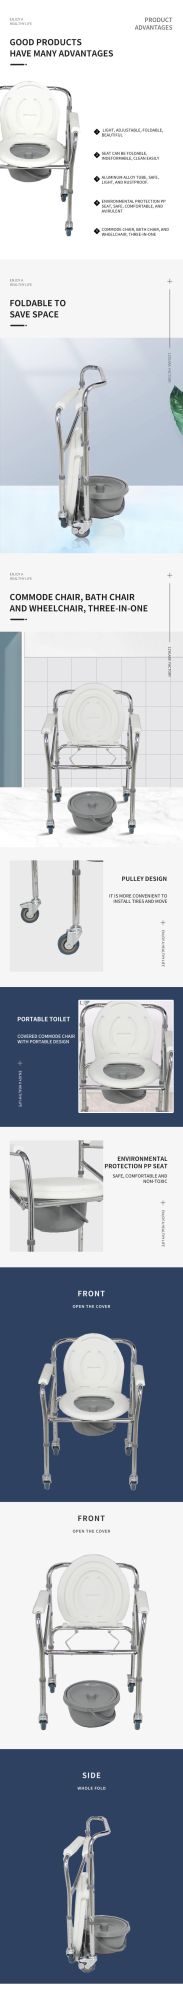 Toilet Chair Home Care Indoor Disabled Shower Wheeled Commode